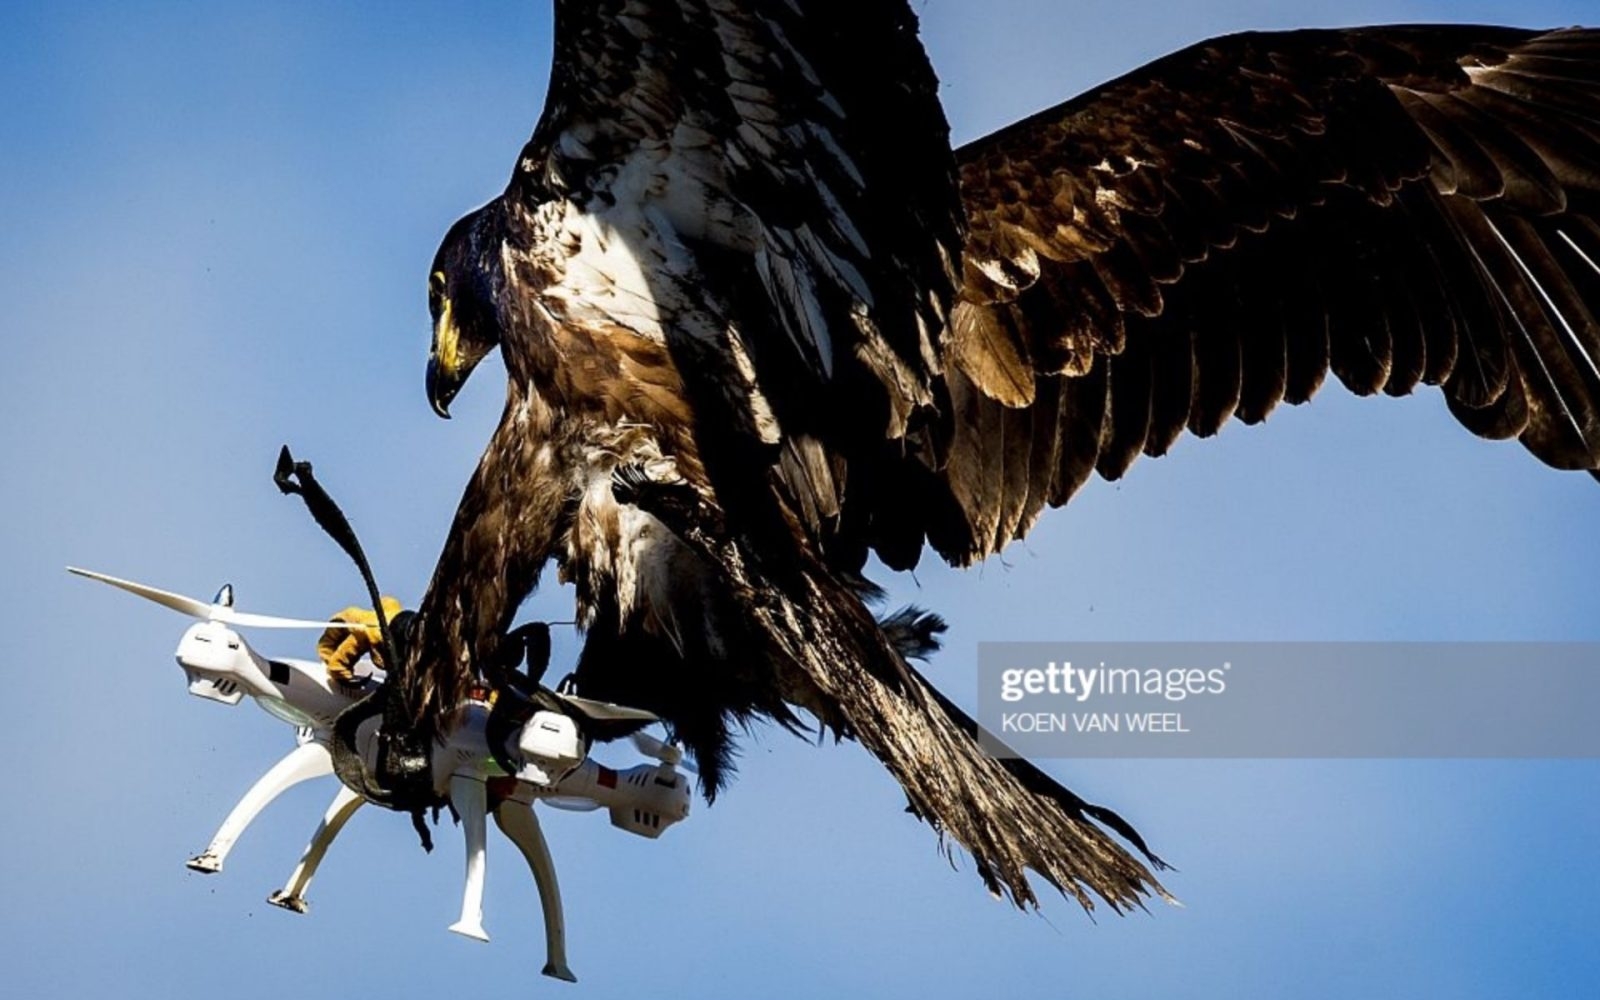 drone-catching-eagle-photo-goes-viral